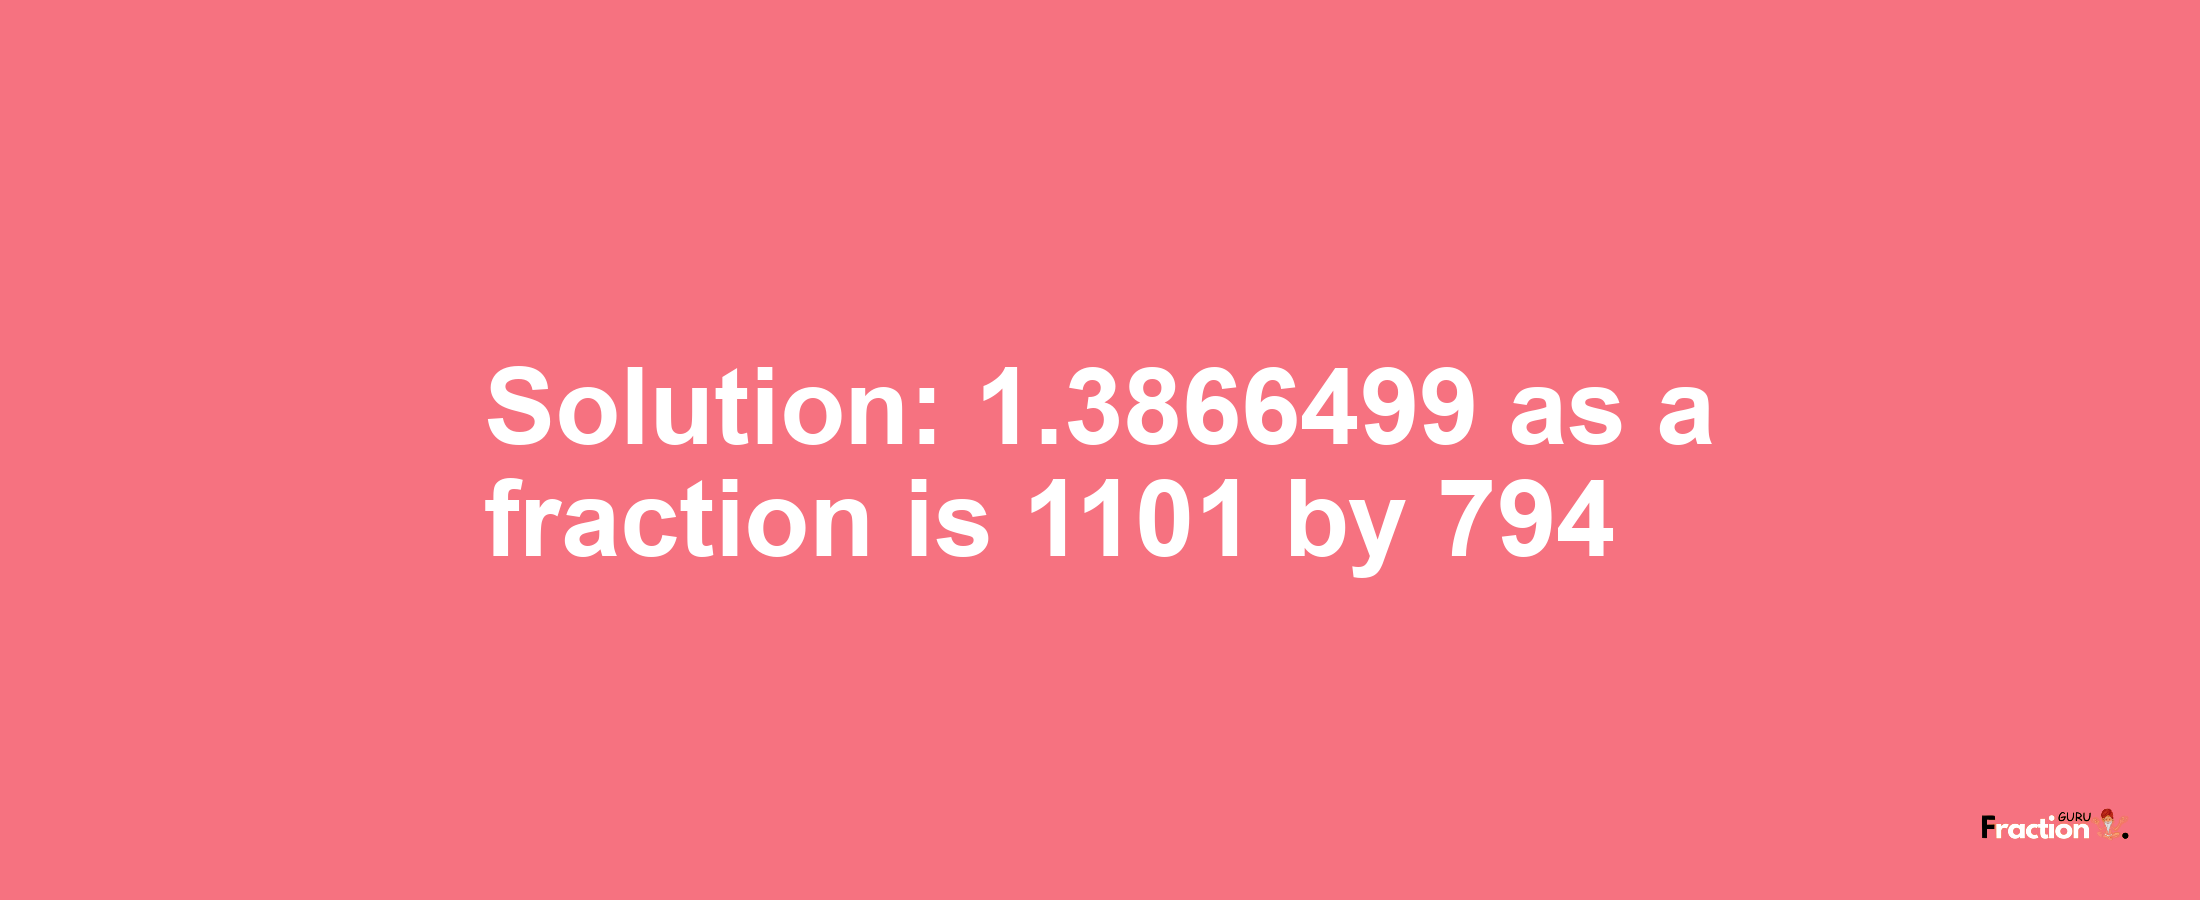 Solution:1.3866499 as a fraction is 1101/794